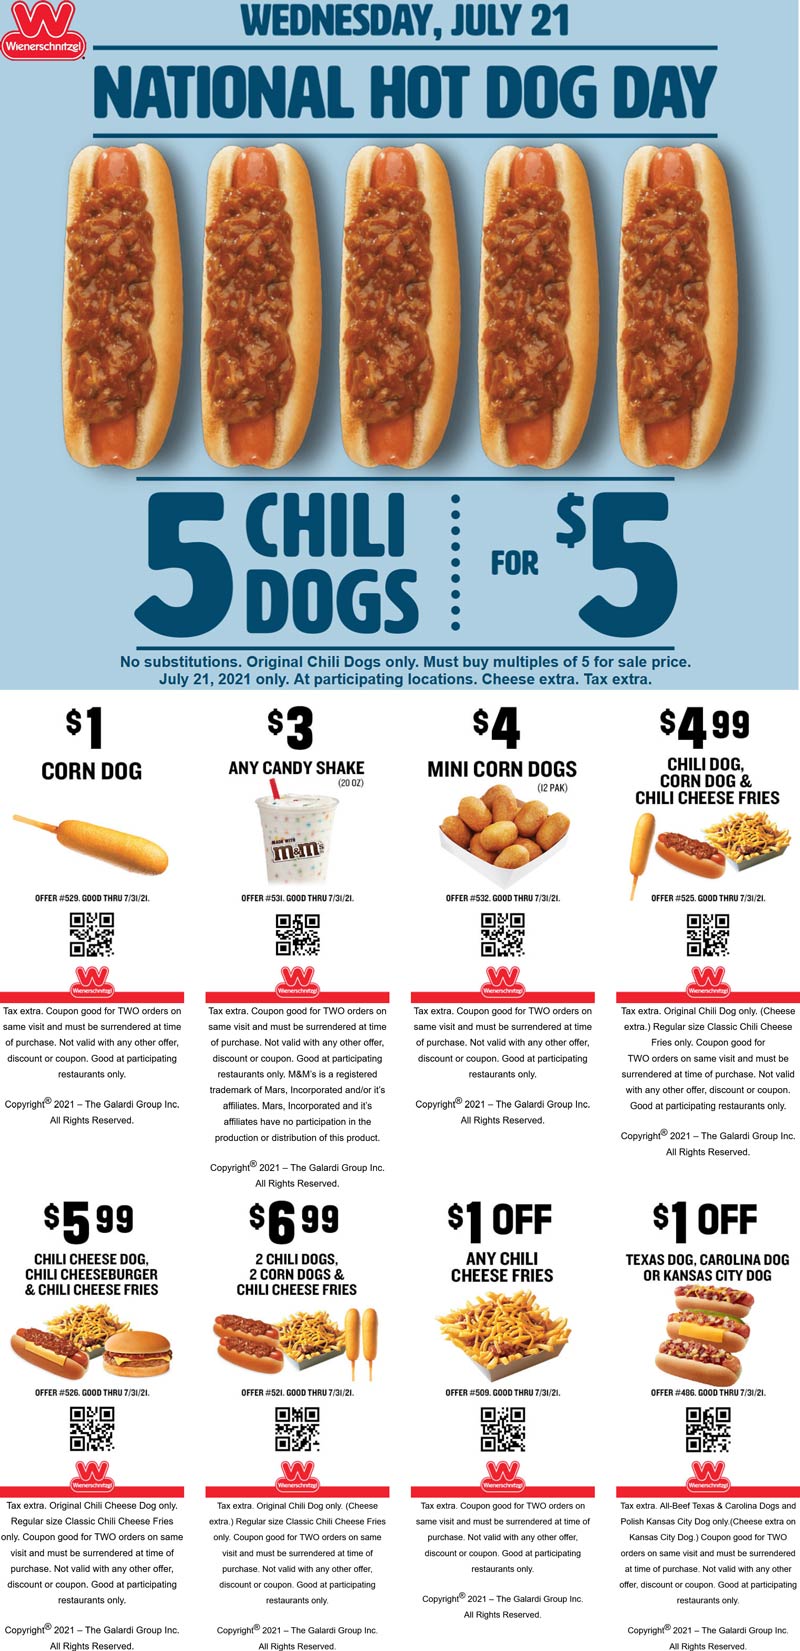 5 chili dogs for 5 & more Wednesday at Wienerschnitzel restaurants 